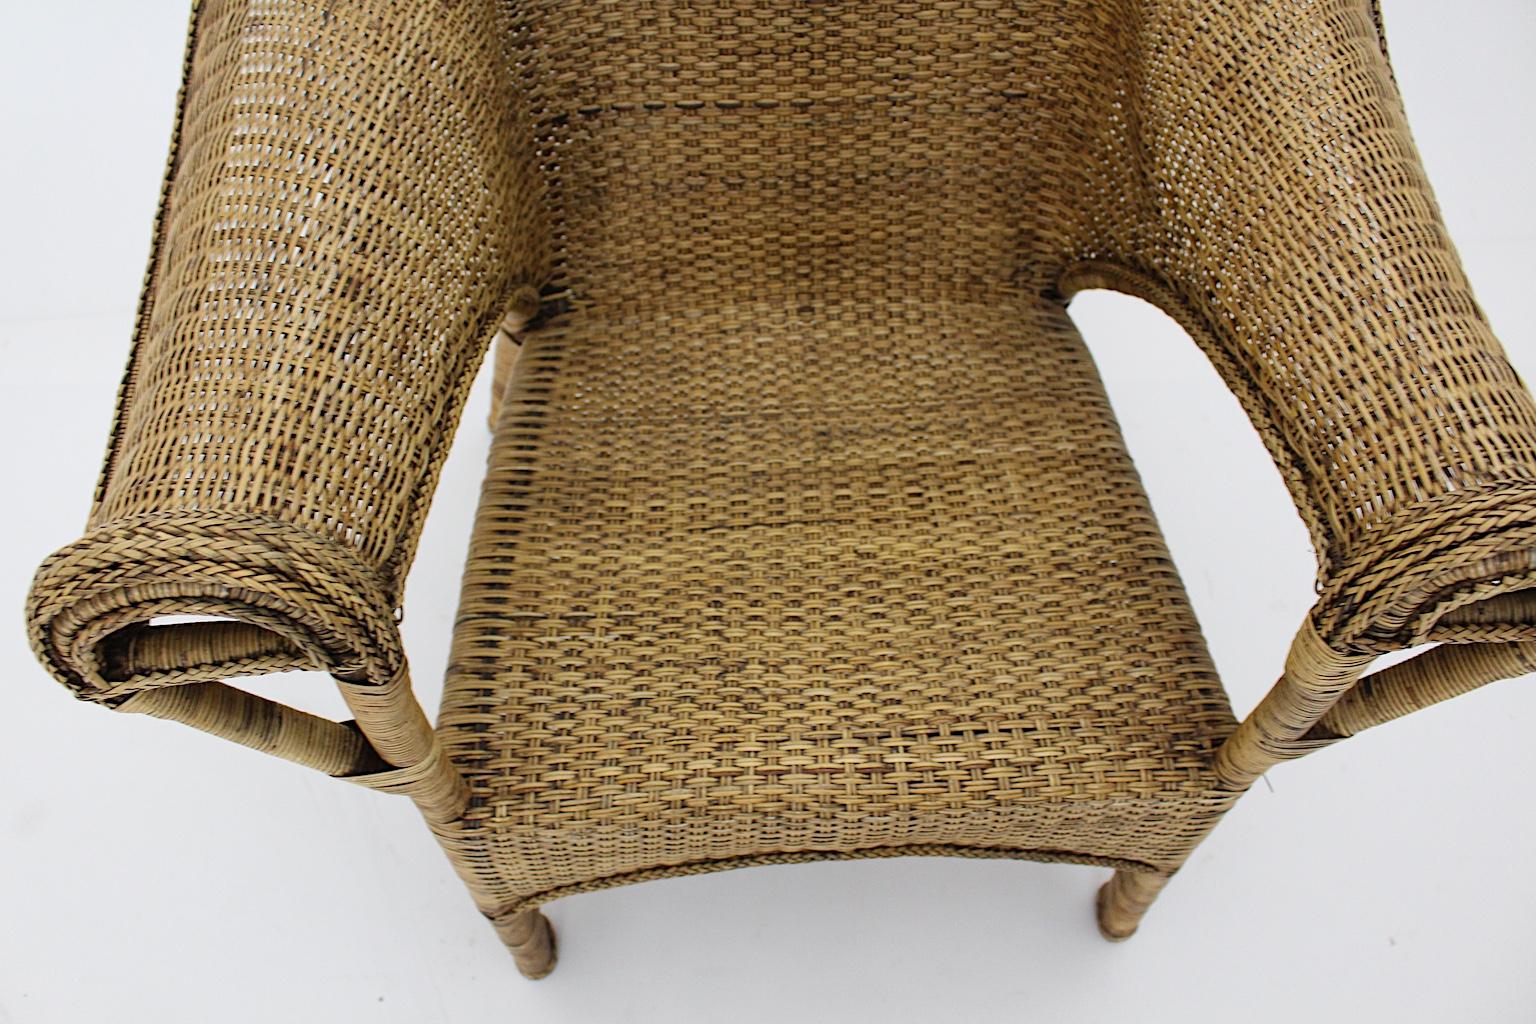 Organic Arts & Crafts Vintage Wicker Rattan Armchair Dryad and Co circa 1910 UK For Sale 1